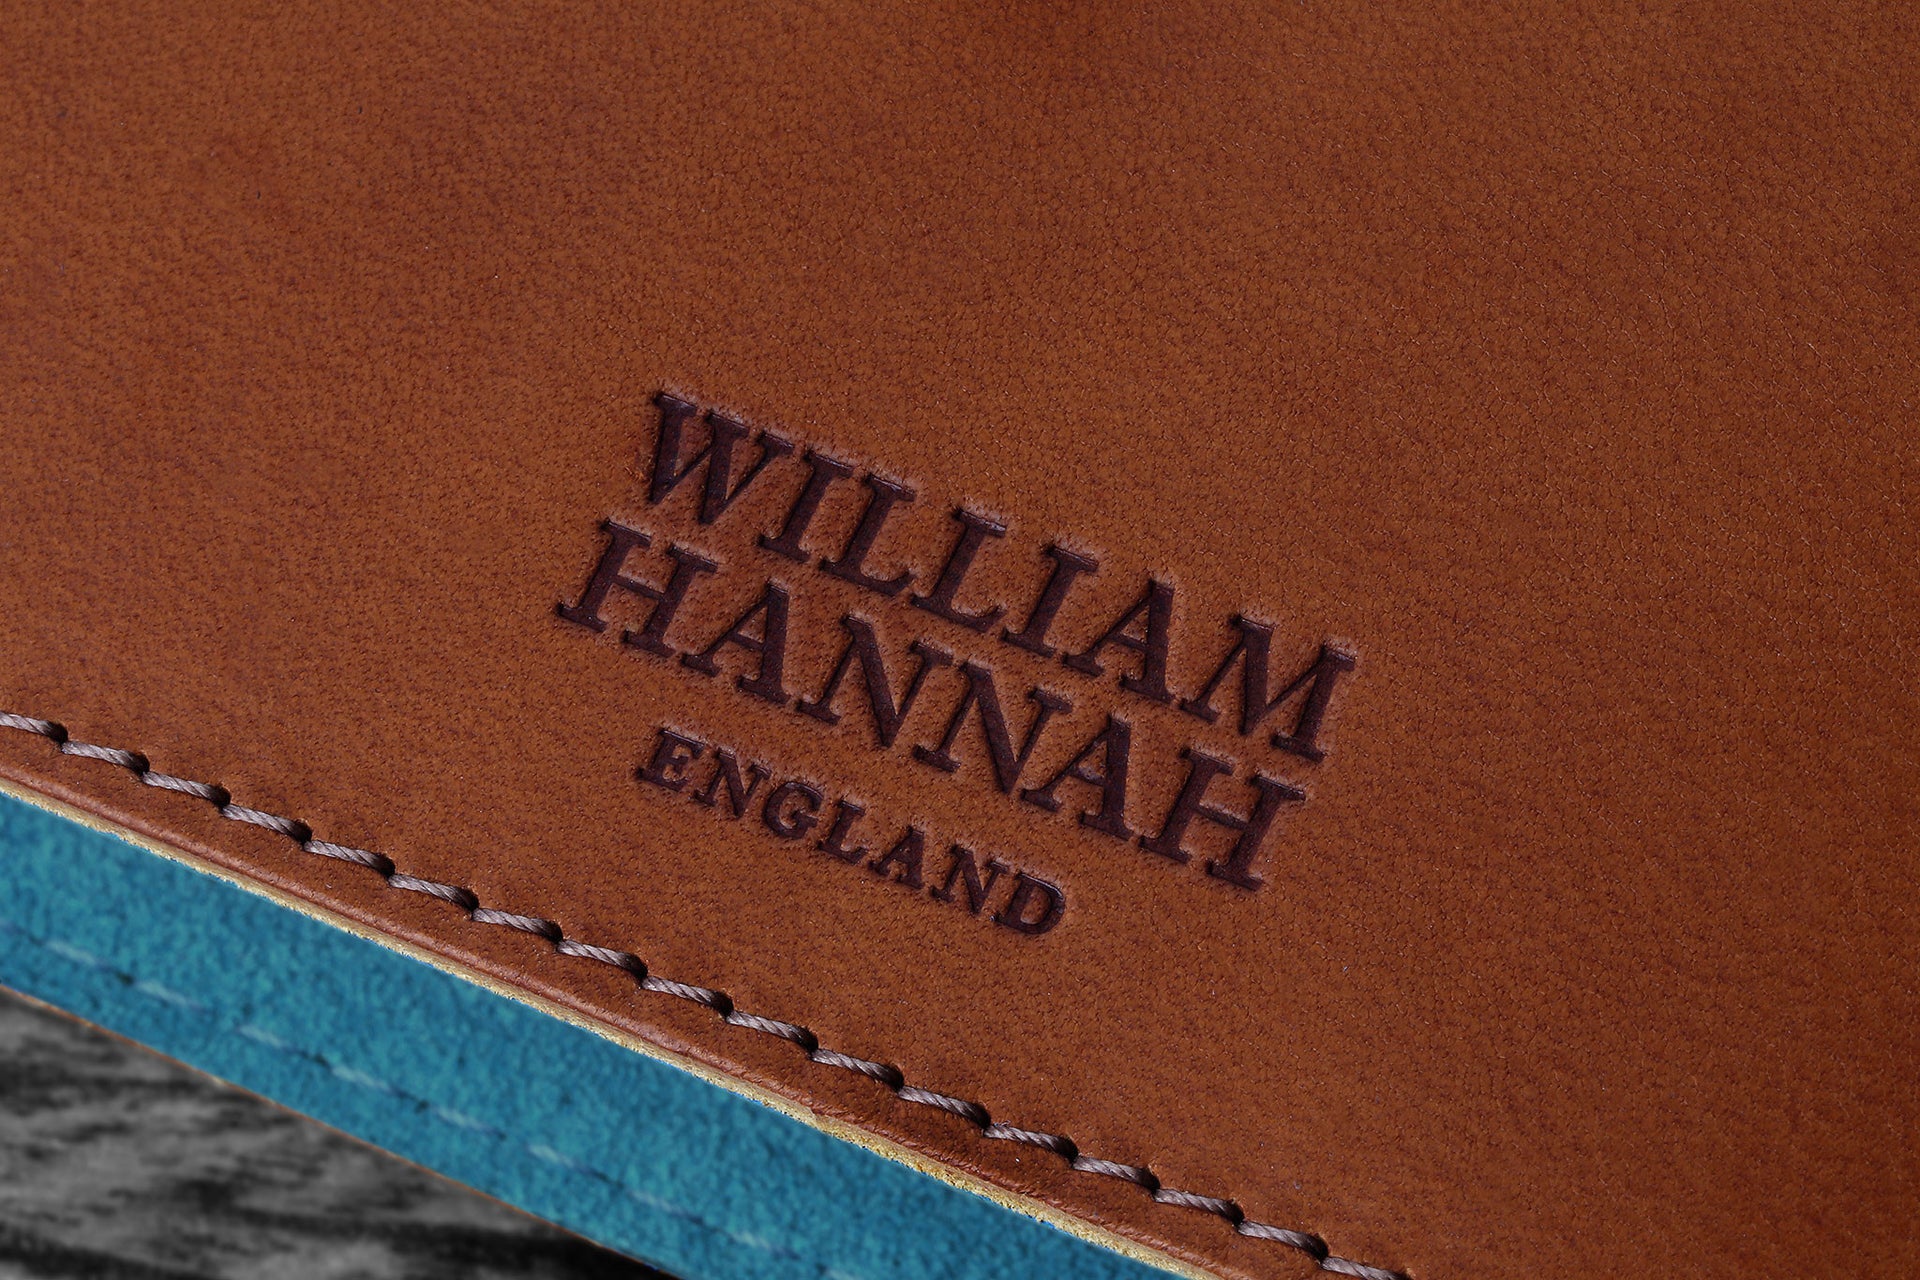 William Hannah tan leather and light blue suede A6 notebook: cover logo